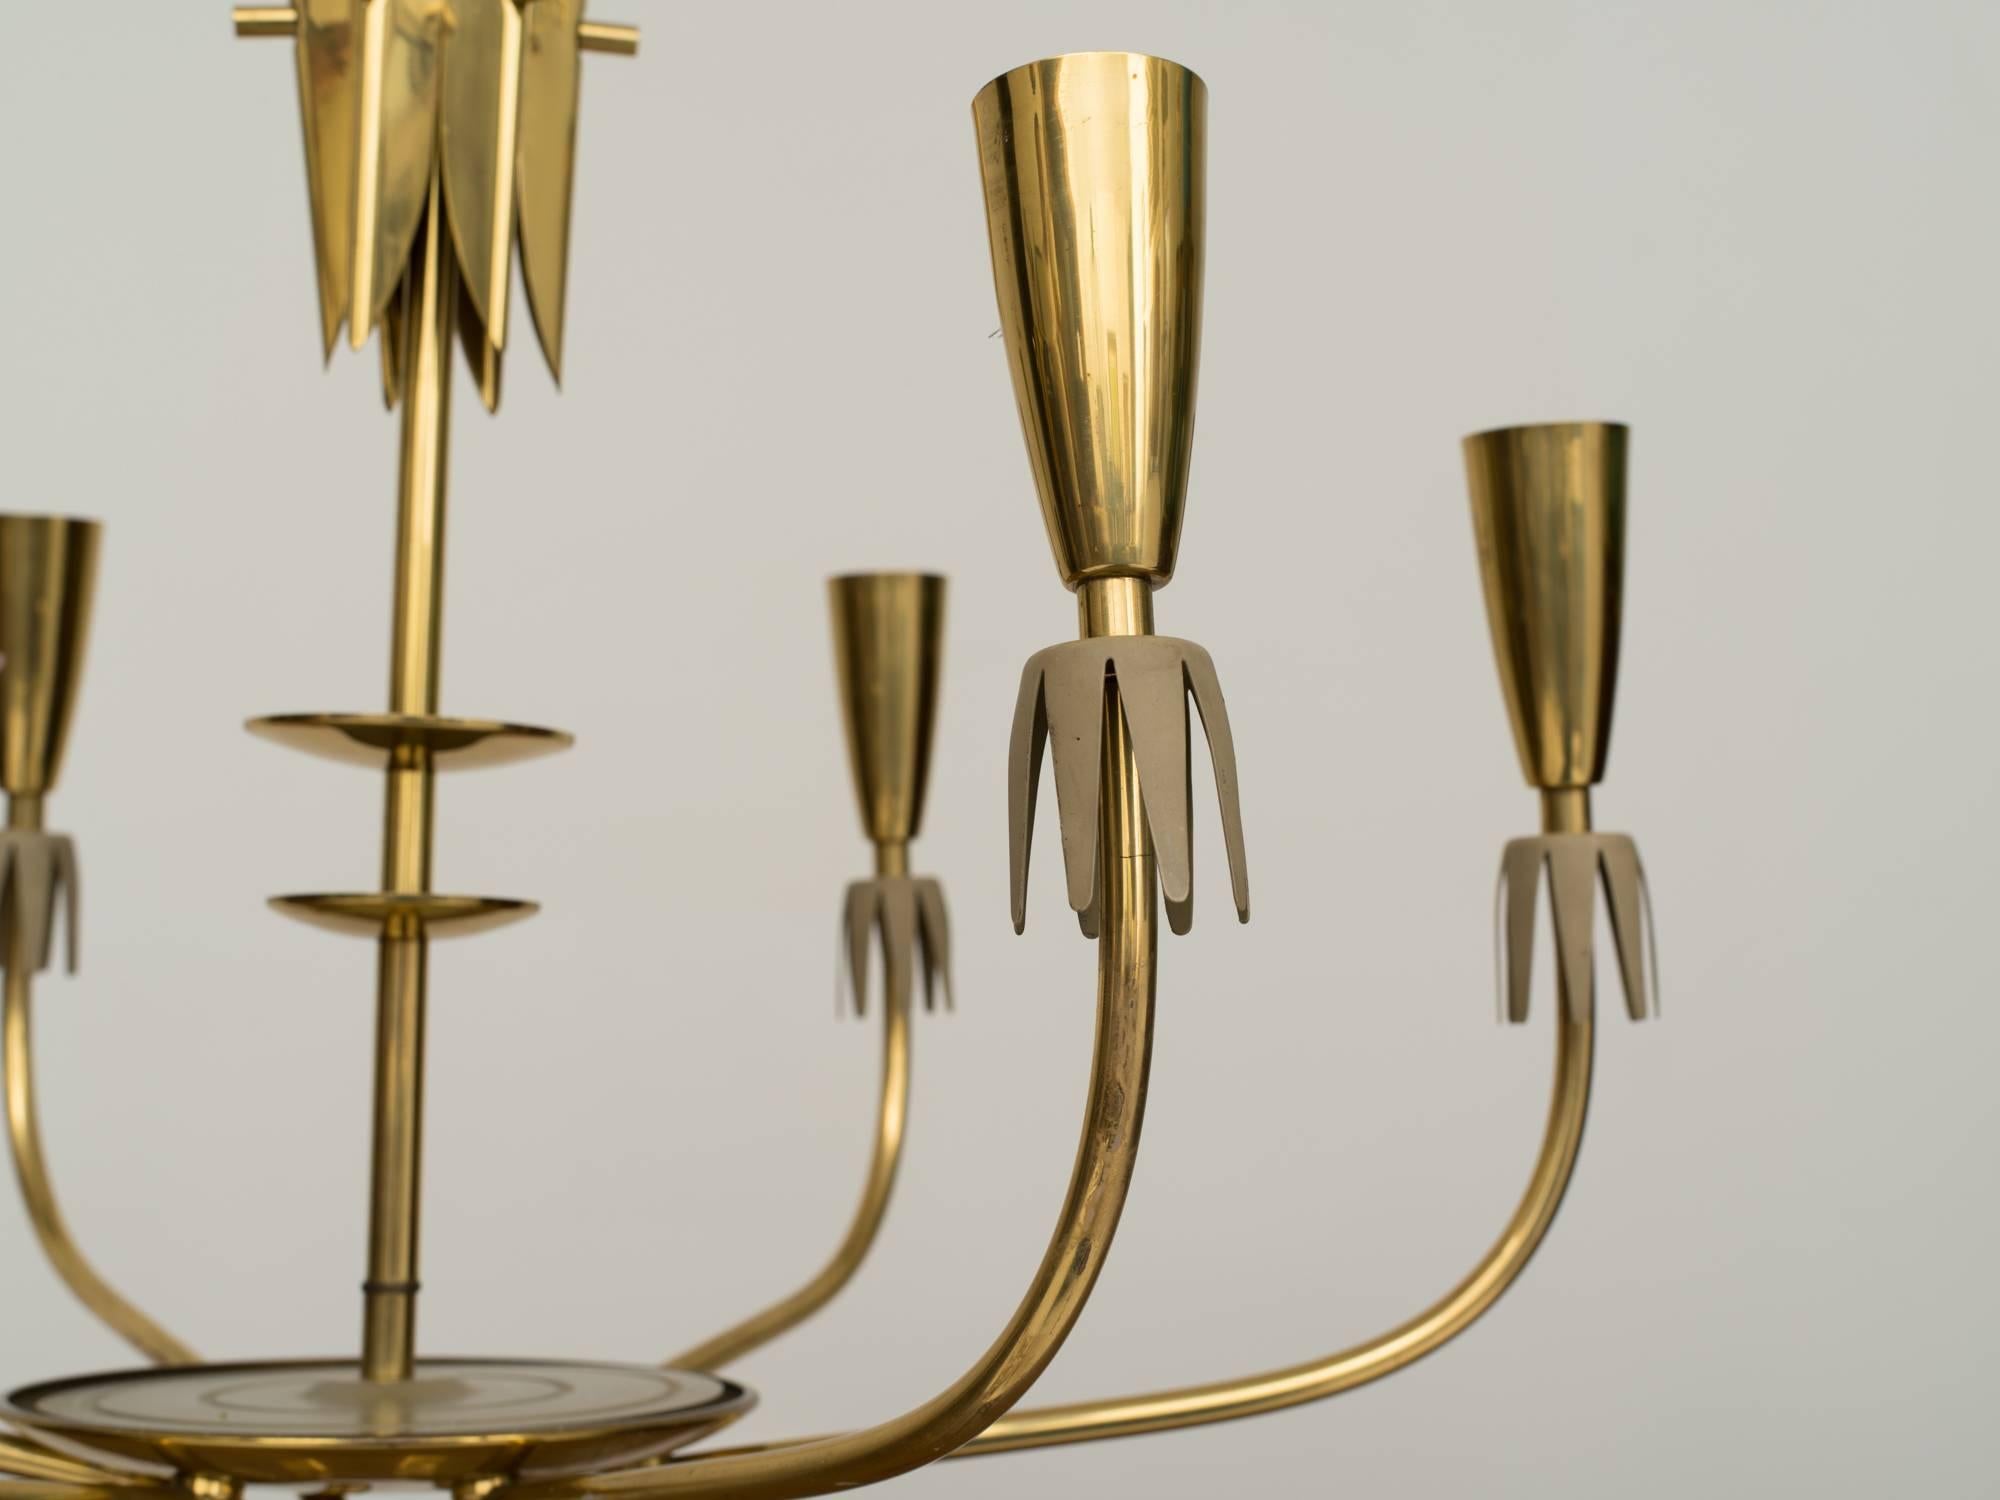 Modernist 1960s German brass six-arm chandelier has brass petals on each cone, making them into flowers when illuminated. Brass rod has central circles and petals attached, with brass ceiling cap.